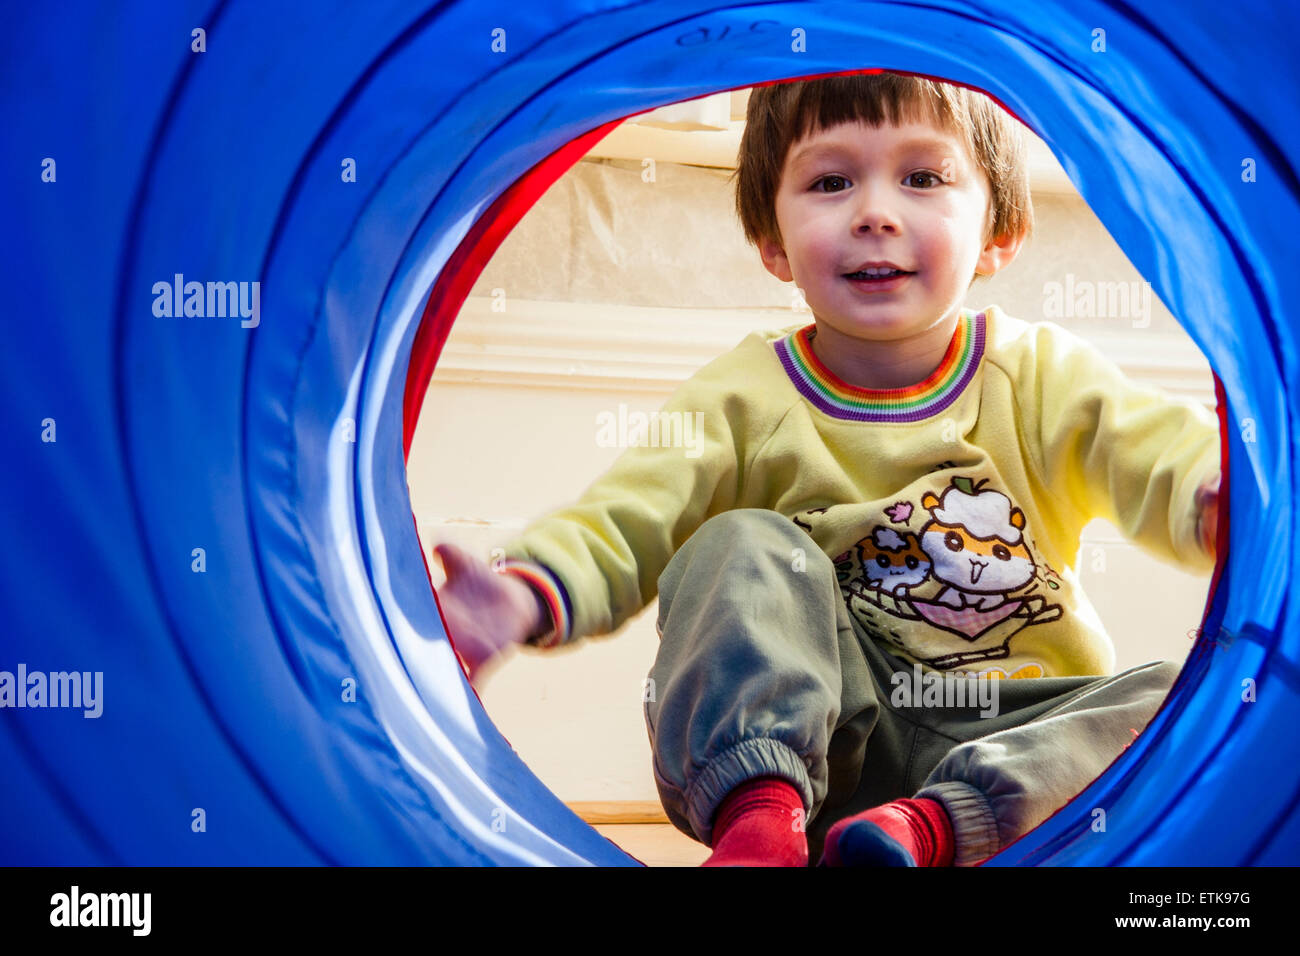 View from inside blue fabric play tunnel of young child, boy, 4-5 year old, at end of the tunnel, holding edges and looking at viewer, smiling. Stock Photo